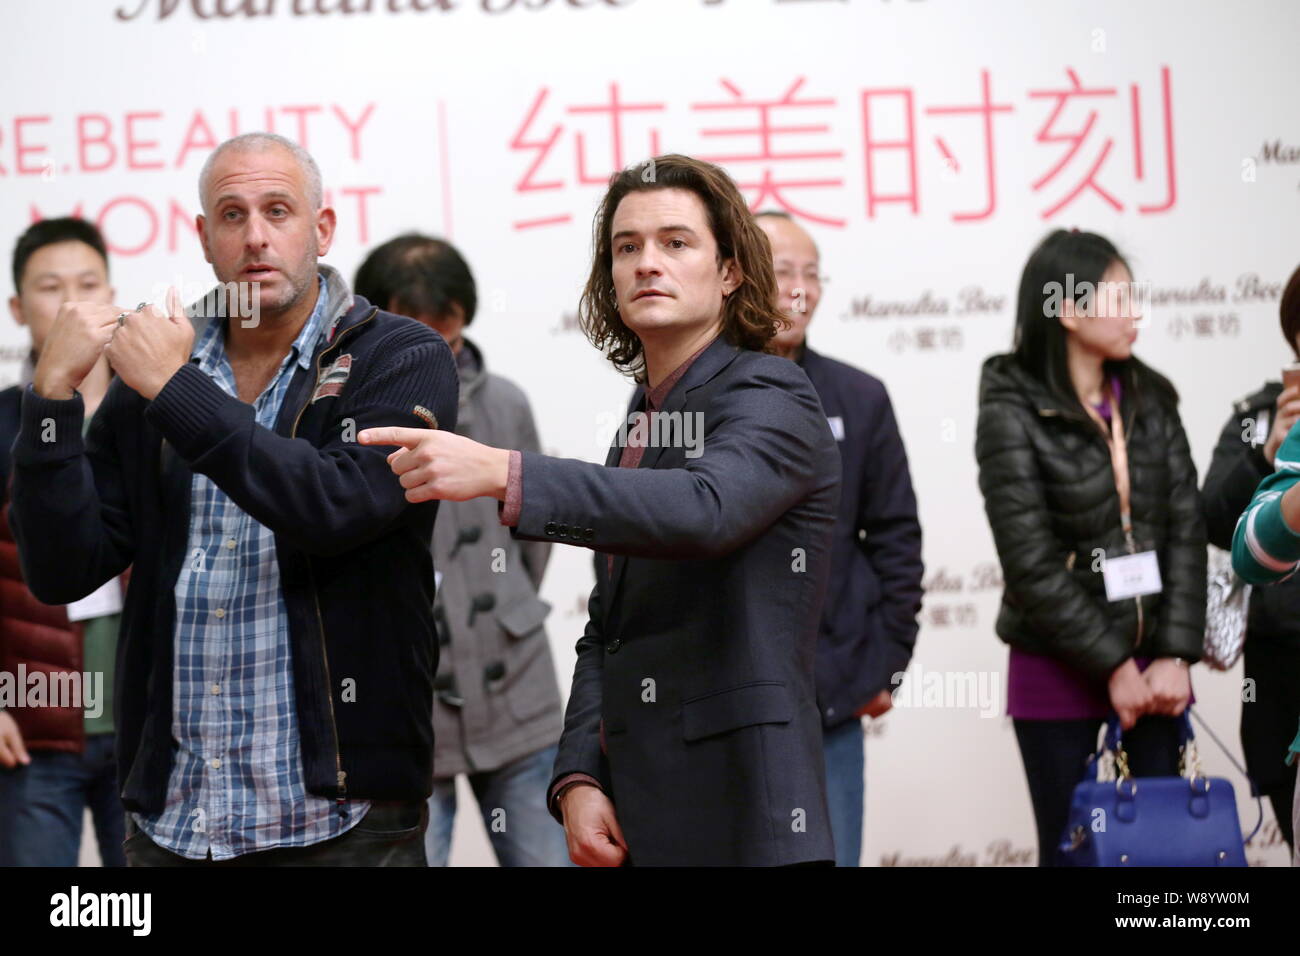 English actor Orlando Bloom, center, attends a promotional event for Manuka Bee Lip Care in Shanghai, China, 16 December 2014. Stock Photo